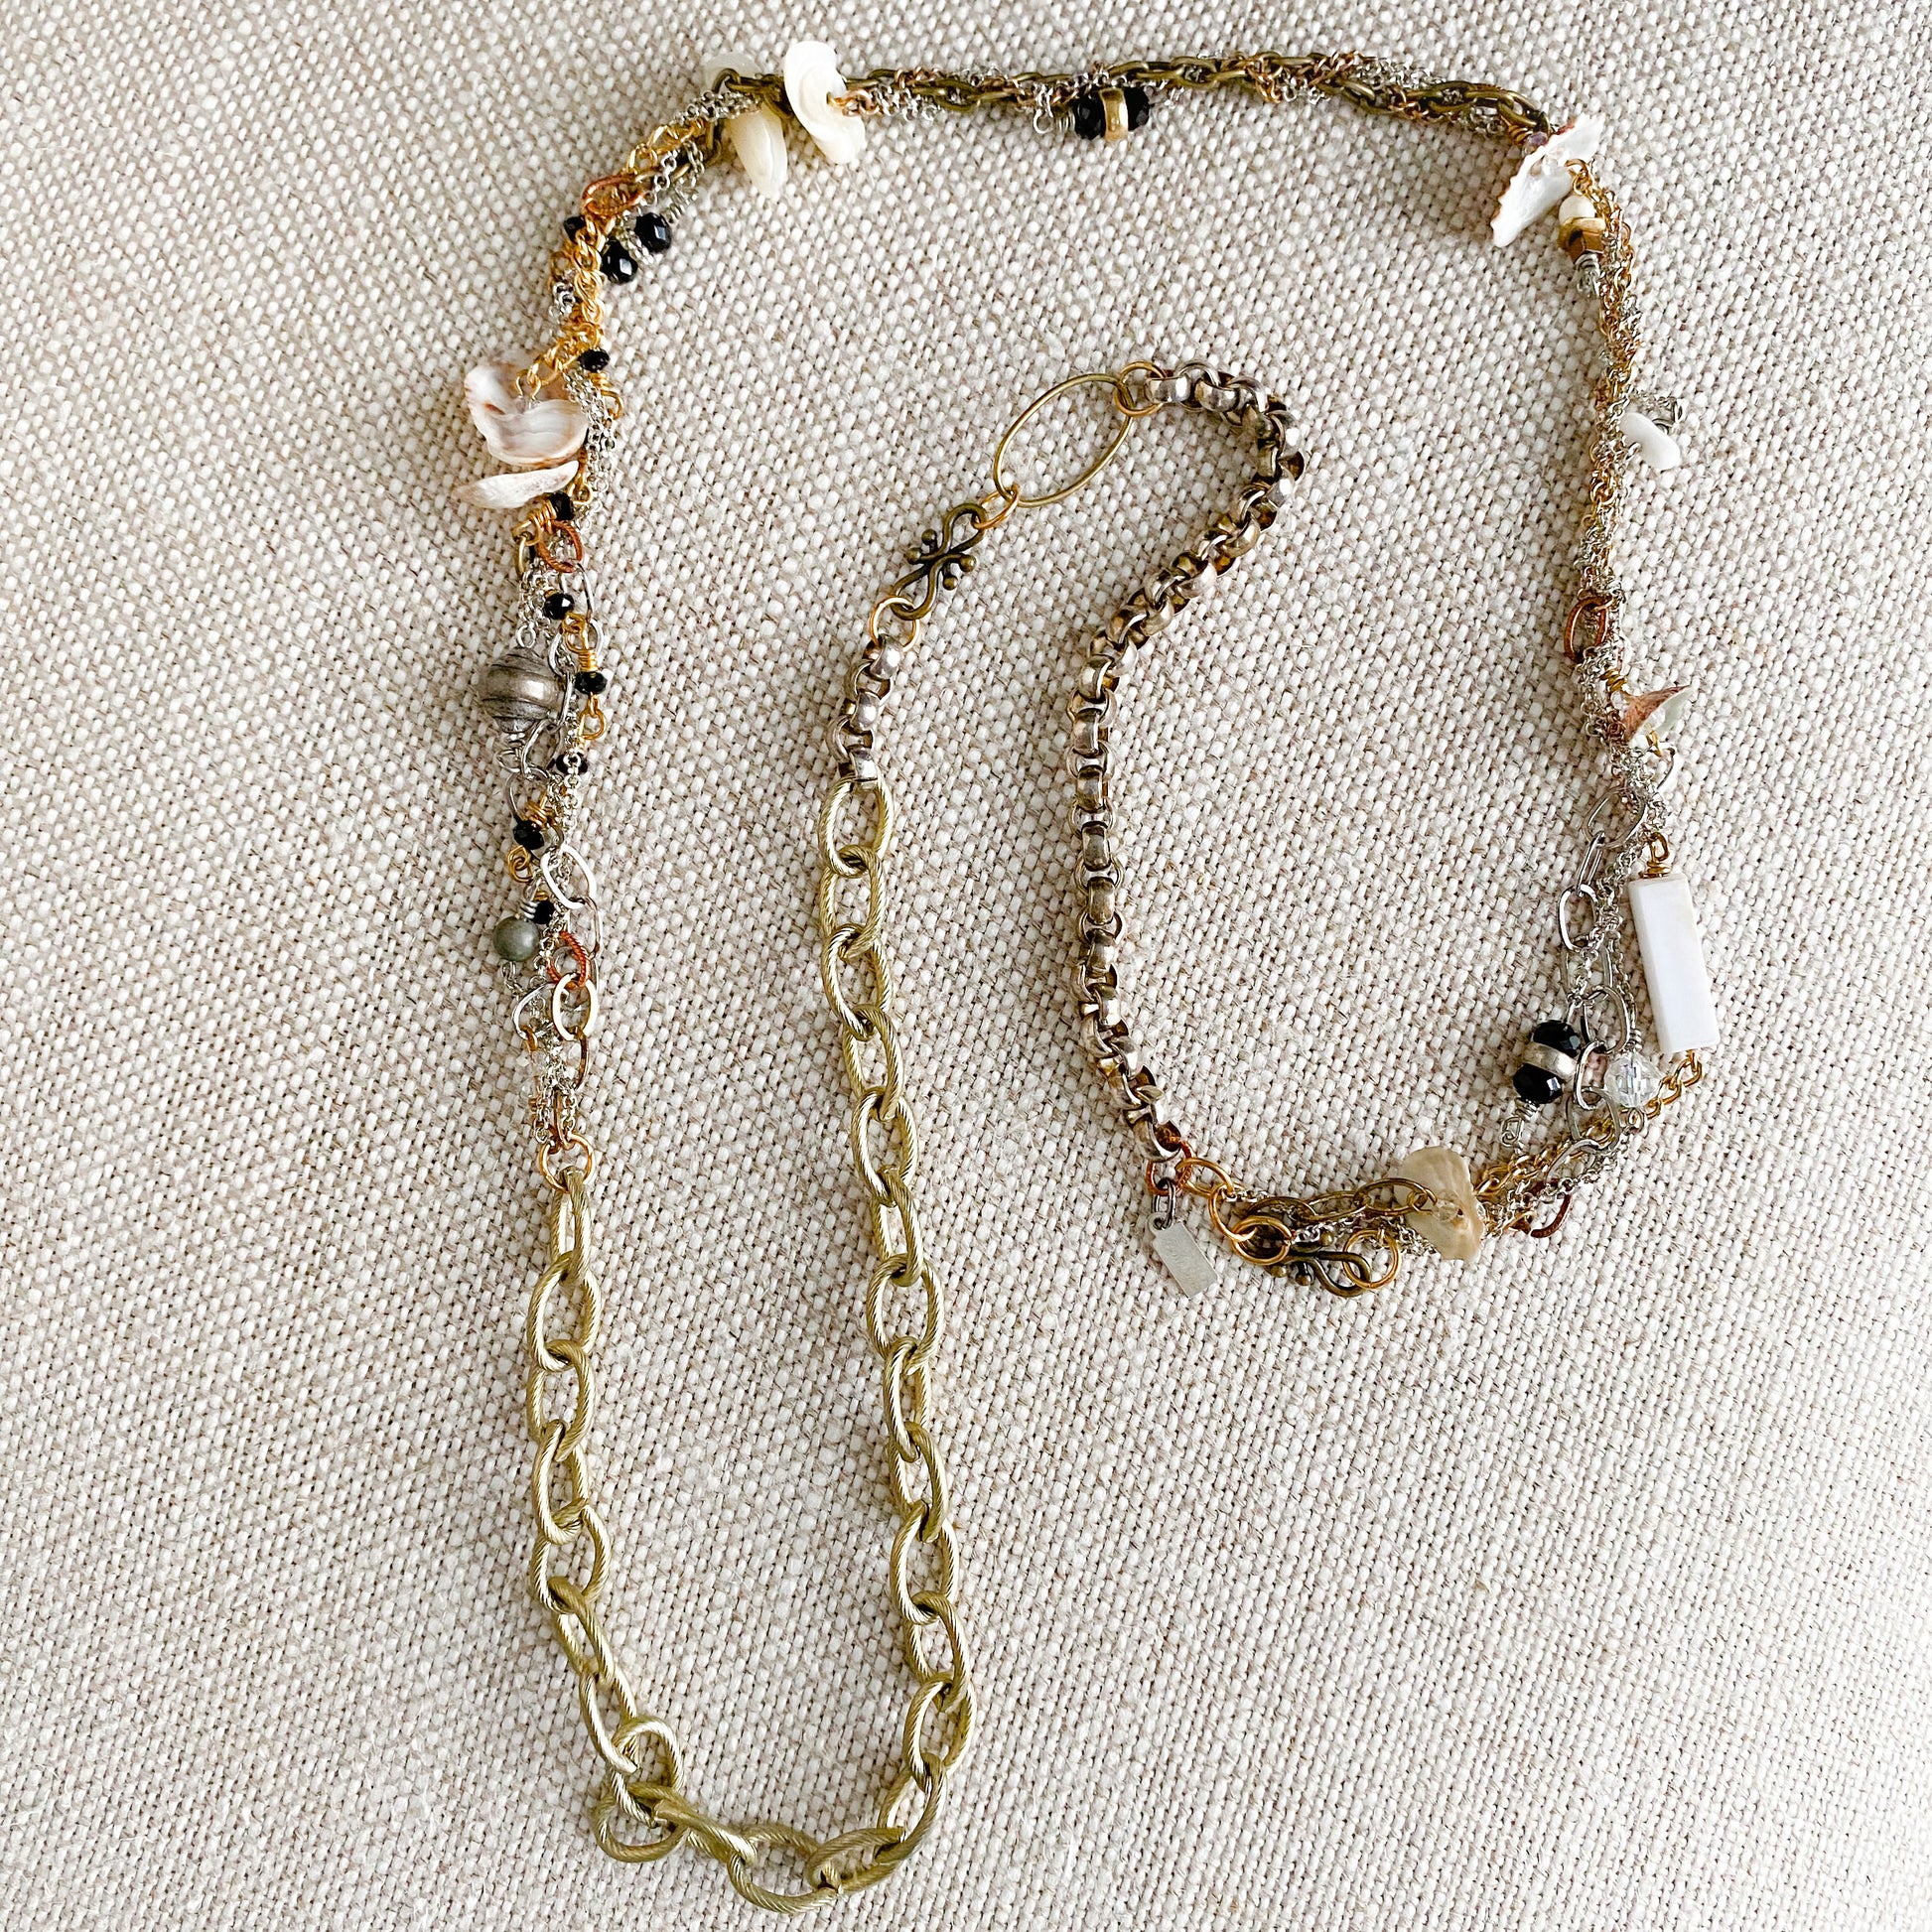 Mother of Pearl Braided Chain Necklace - BelleStyle